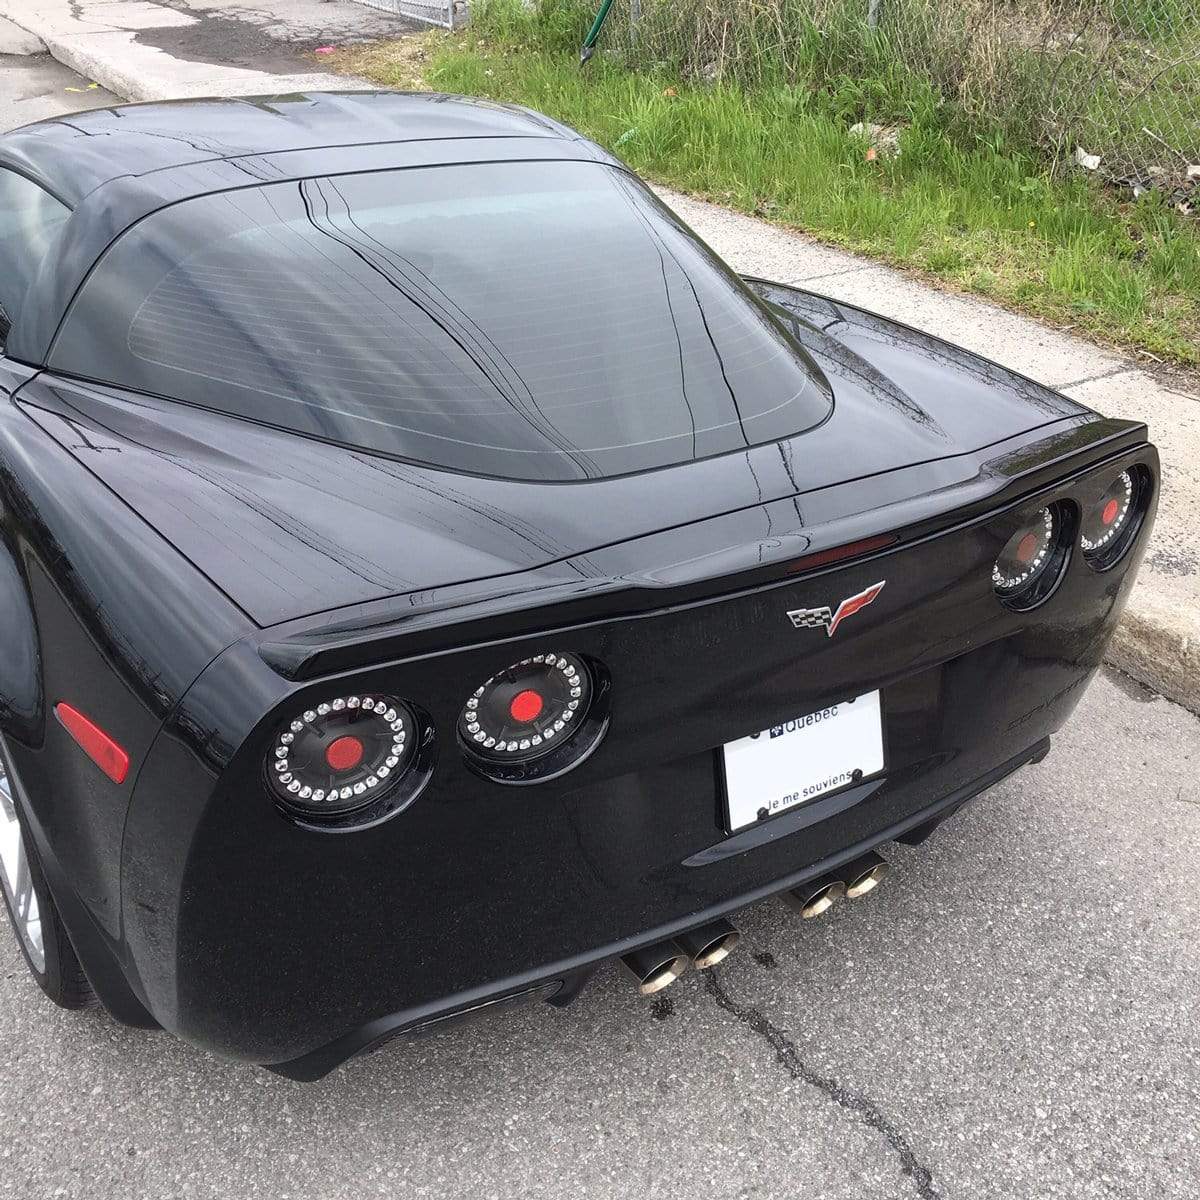 ACS Composite C6 ZR1 Spoiler for C6 Corvette 2005-2013 | SKU 27-4-047: Enhances downforce for improved track performance and creates an aggressive, racing-inspired aesthetic.